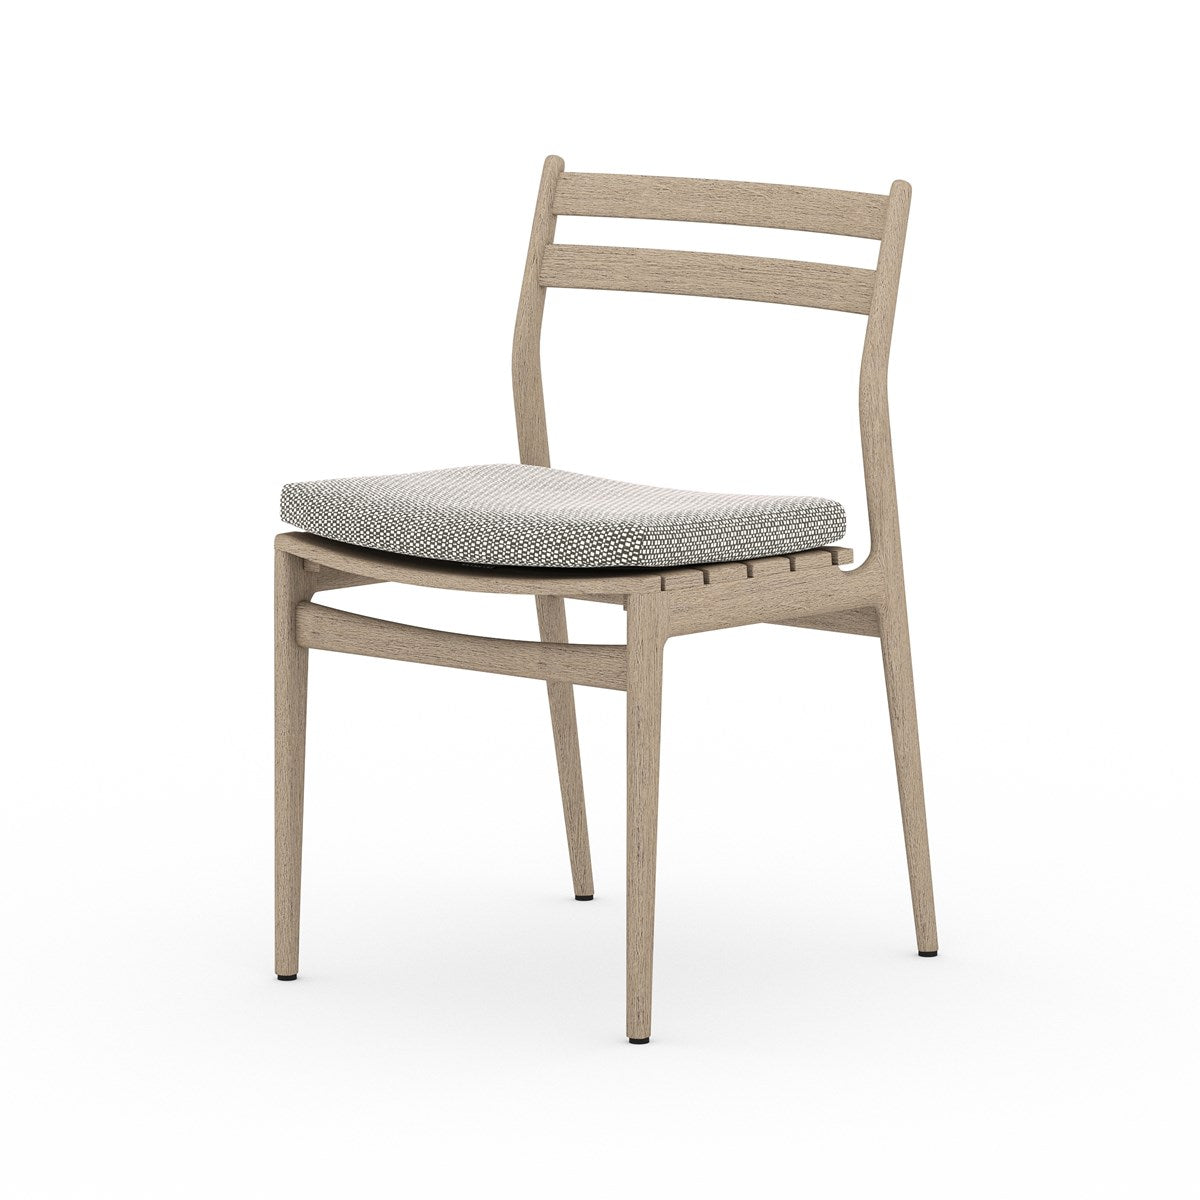 Atherton Outdoor Dining Chair Faye Ash / Washed BrownDining Chair Four Hands  Faye Ash Washed Brown  Four Hands, Burke Decor, Mid Century Modern Furniture, Old Bones Furniture Company, Old Bones Co, Modern Mid Century, Designer Furniture, https://www.oldbonesco.com/